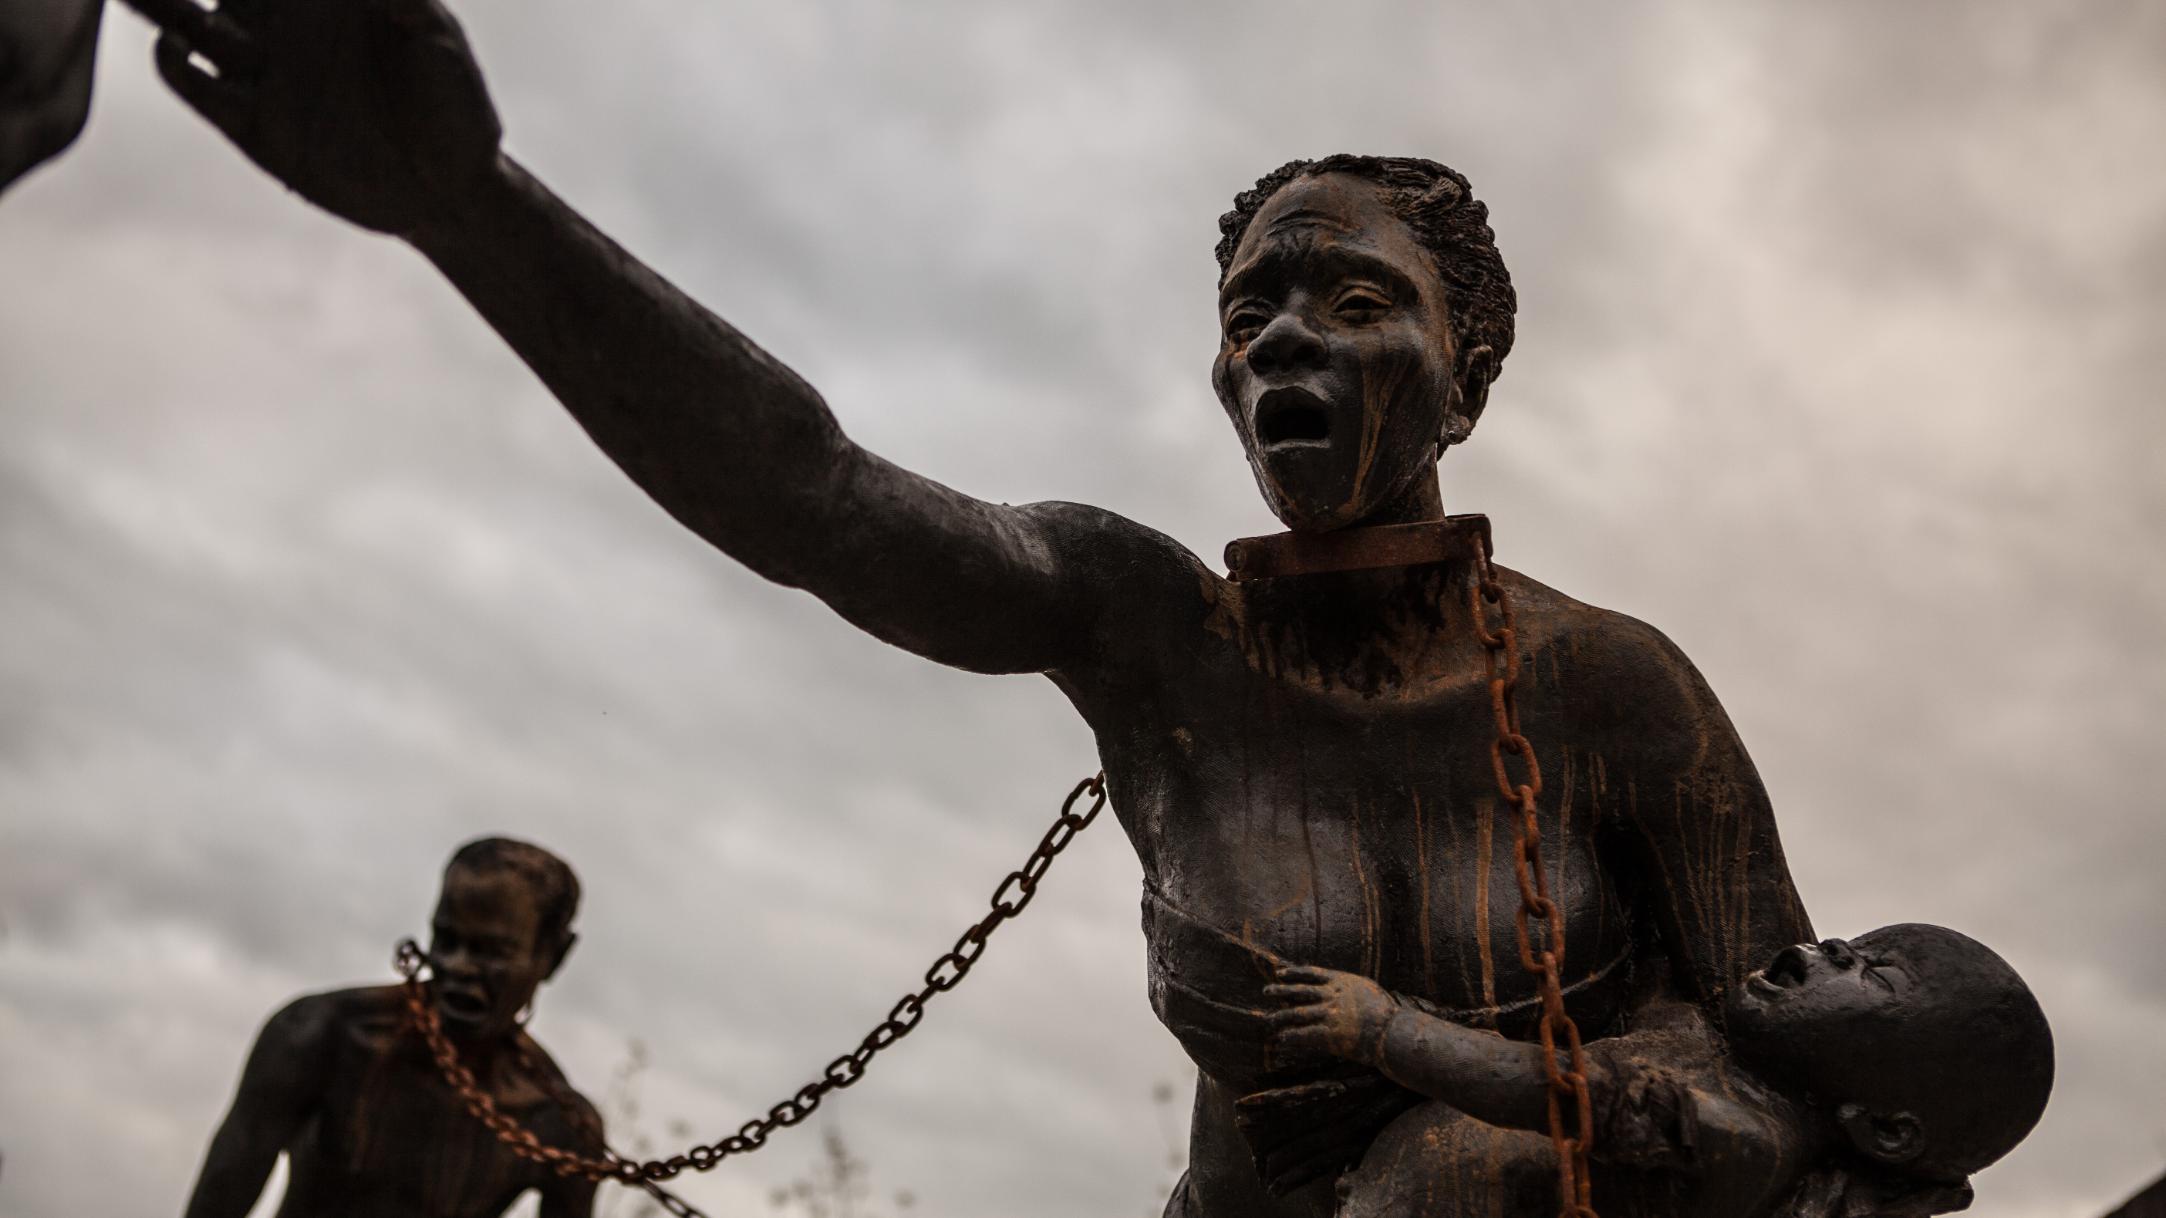 Lynching memorial in Alabama confronts a tortured past | CNN Travel